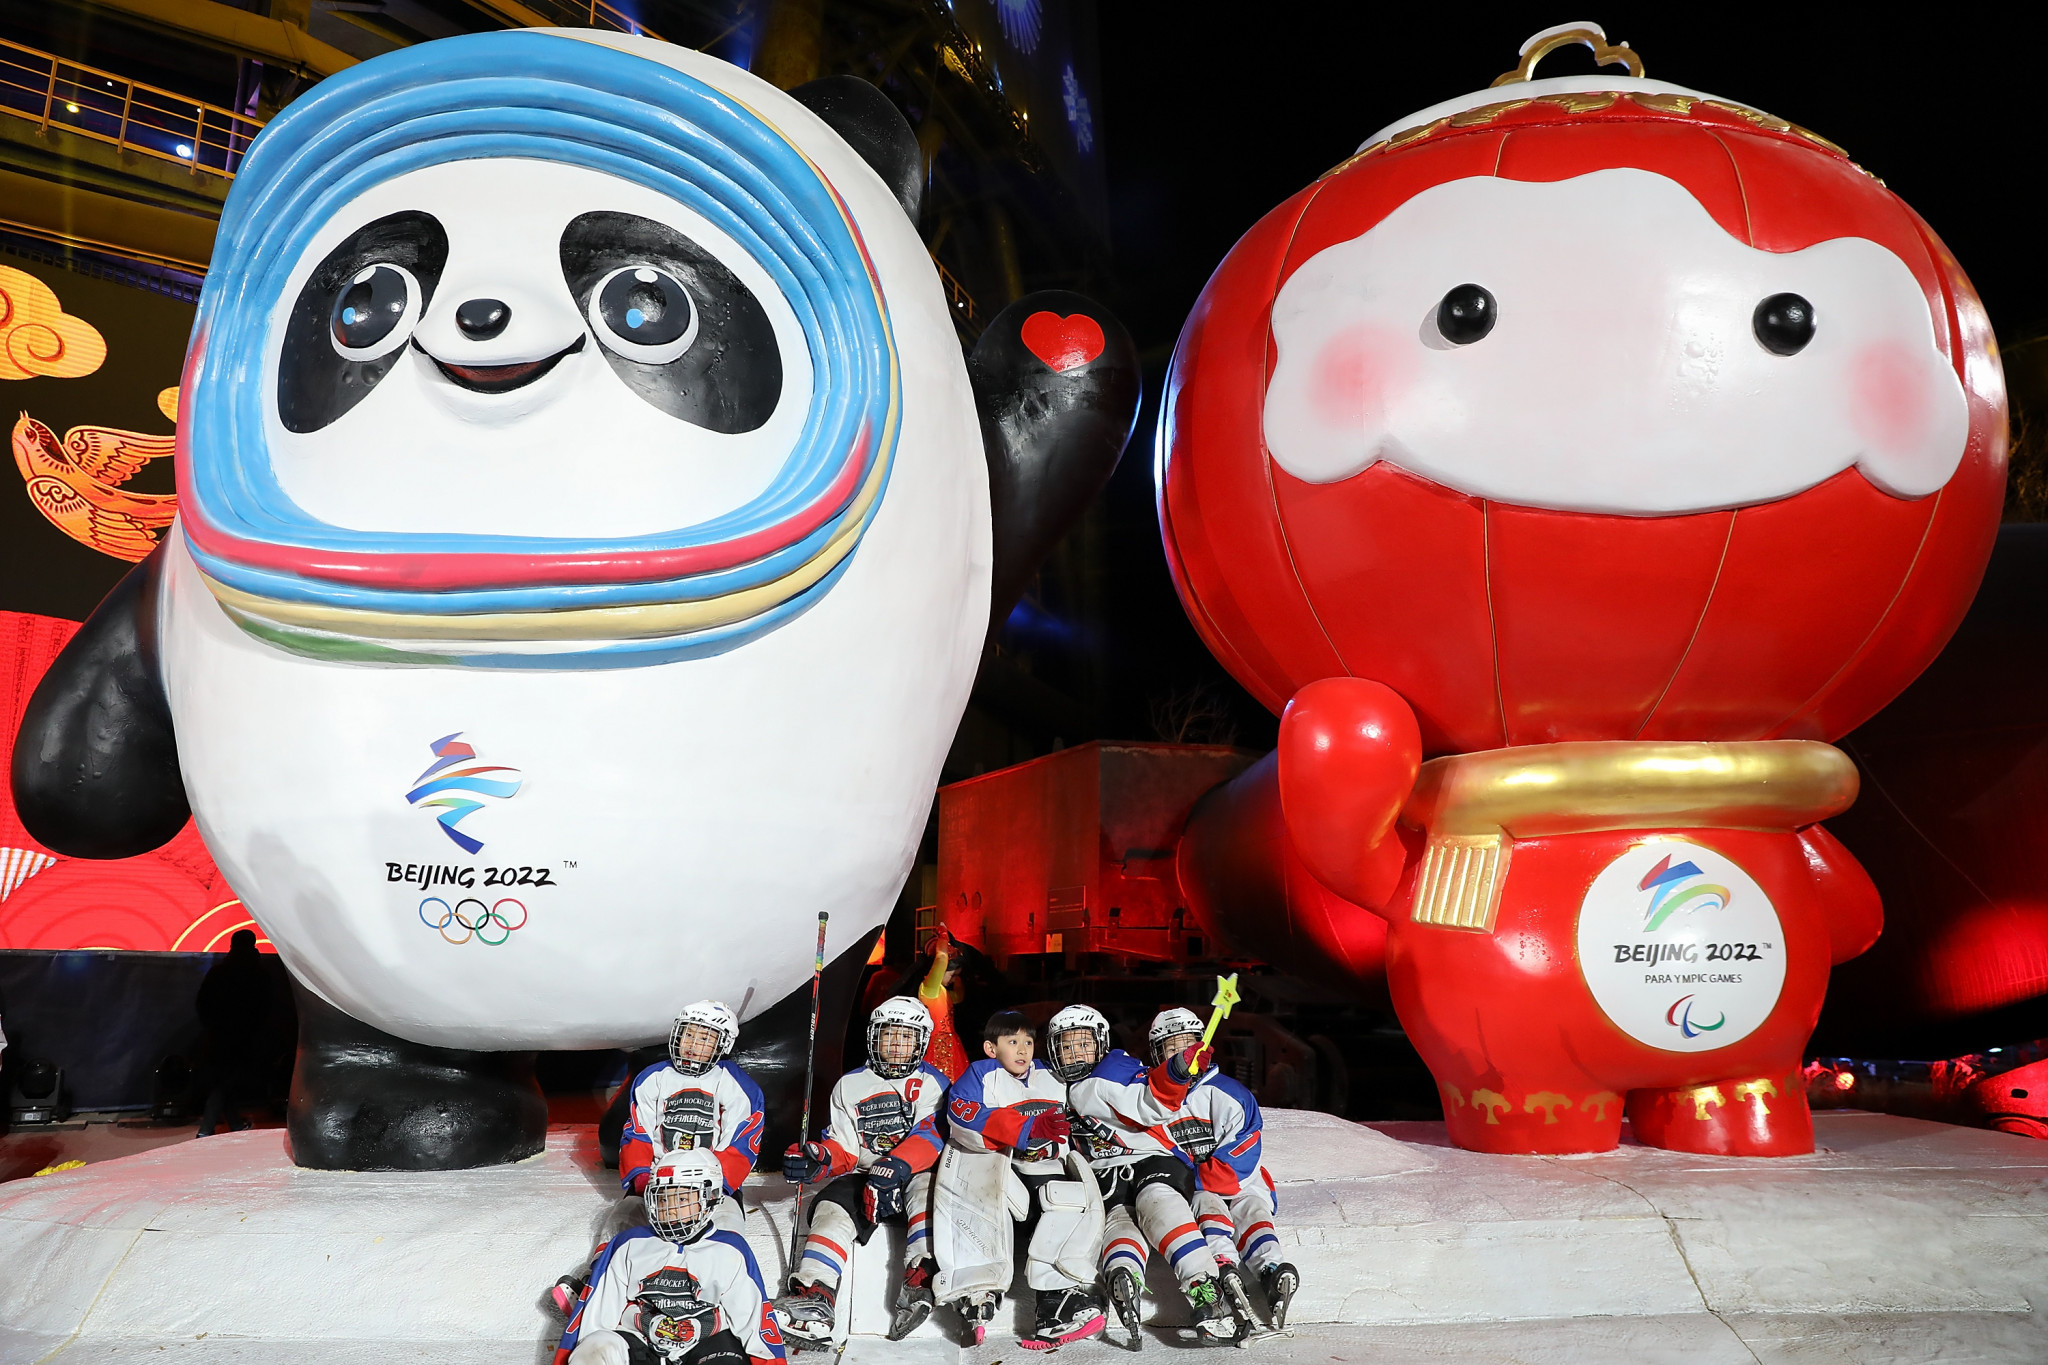 The new campaign will aim to boost the reputation of the Winter Games worldwide ©Getty Images